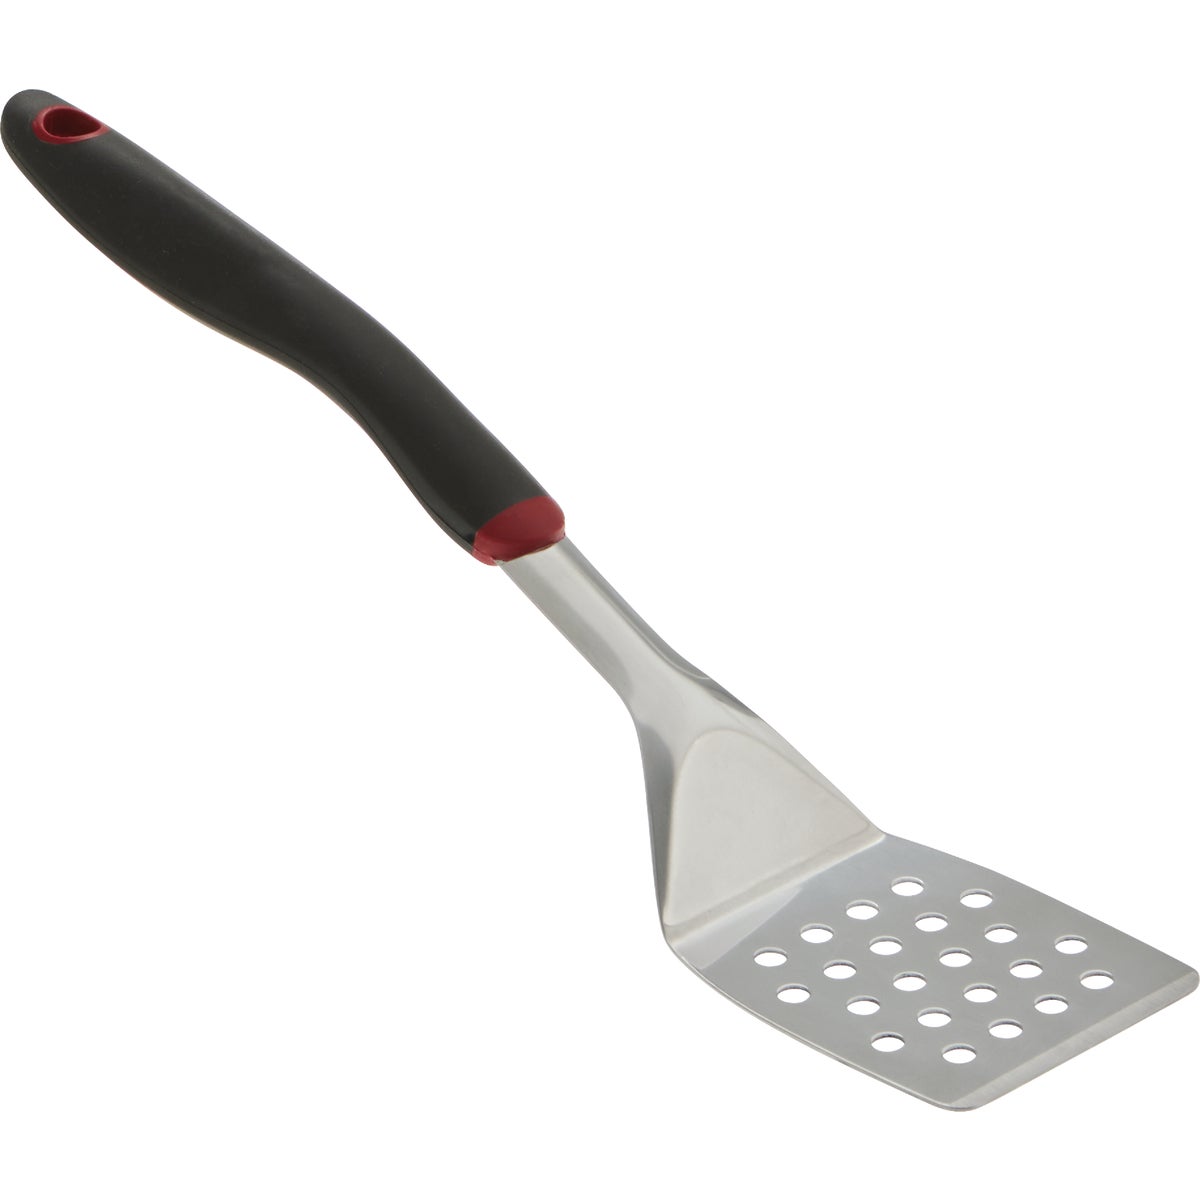 Item 800806, Polished stainless steel turner with an ergonomic soft grip handle.